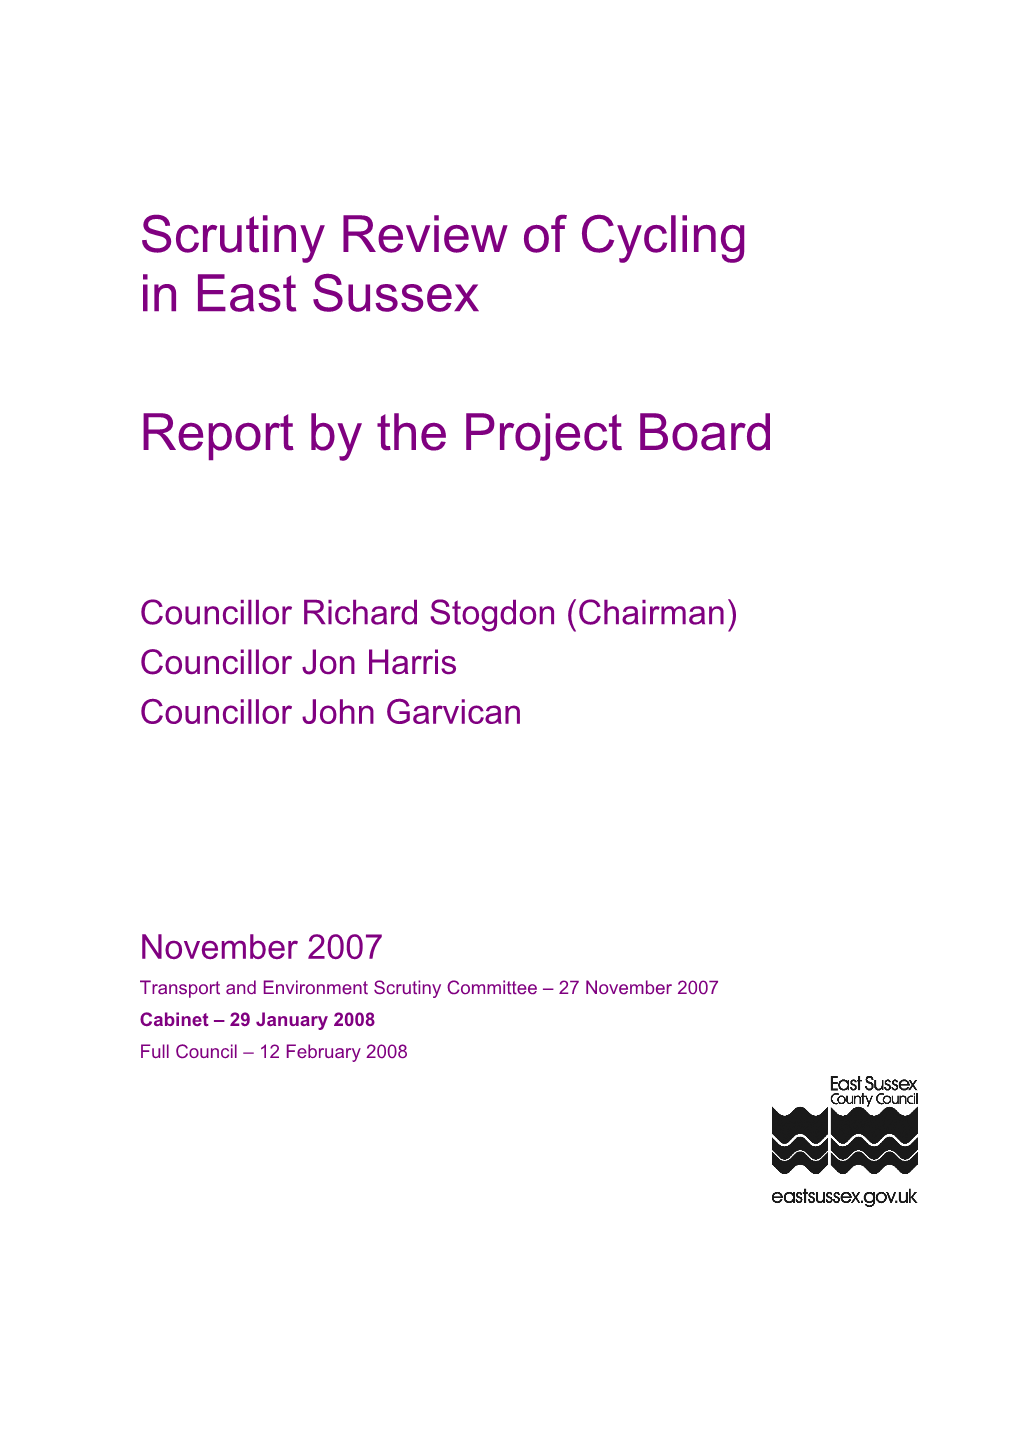 Scrutiny Review of Cycling in East Sussex